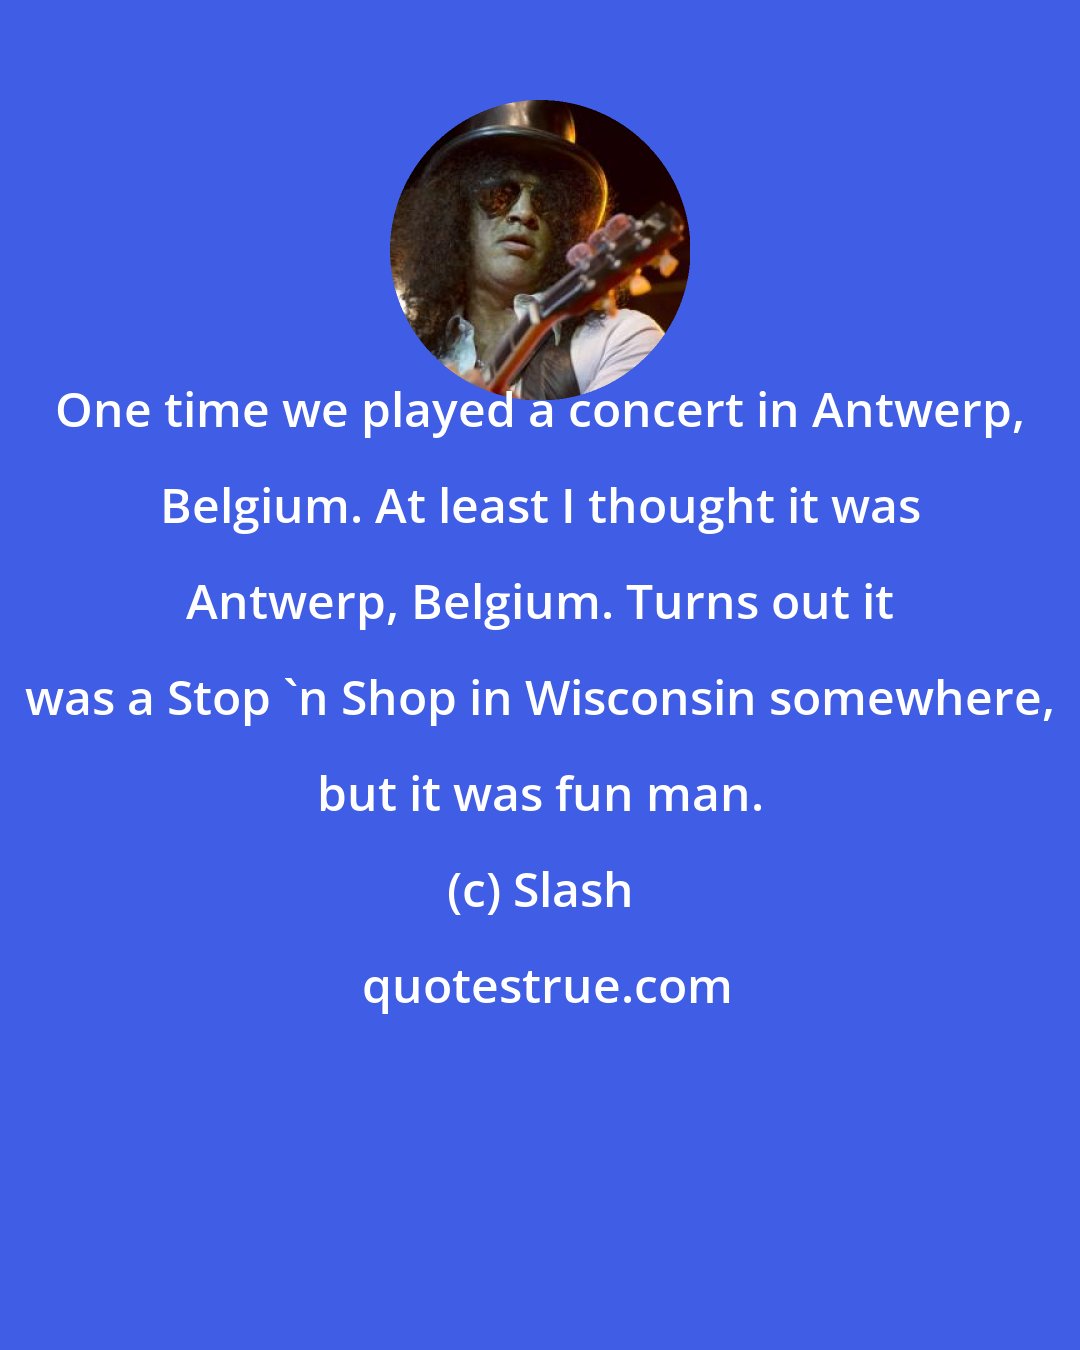 Slash: One time we played a concert in Antwerp, Belgium. At least I thought it was Antwerp, Belgium. Turns out it was a Stop 'n Shop in Wisconsin somewhere, but it was fun man.